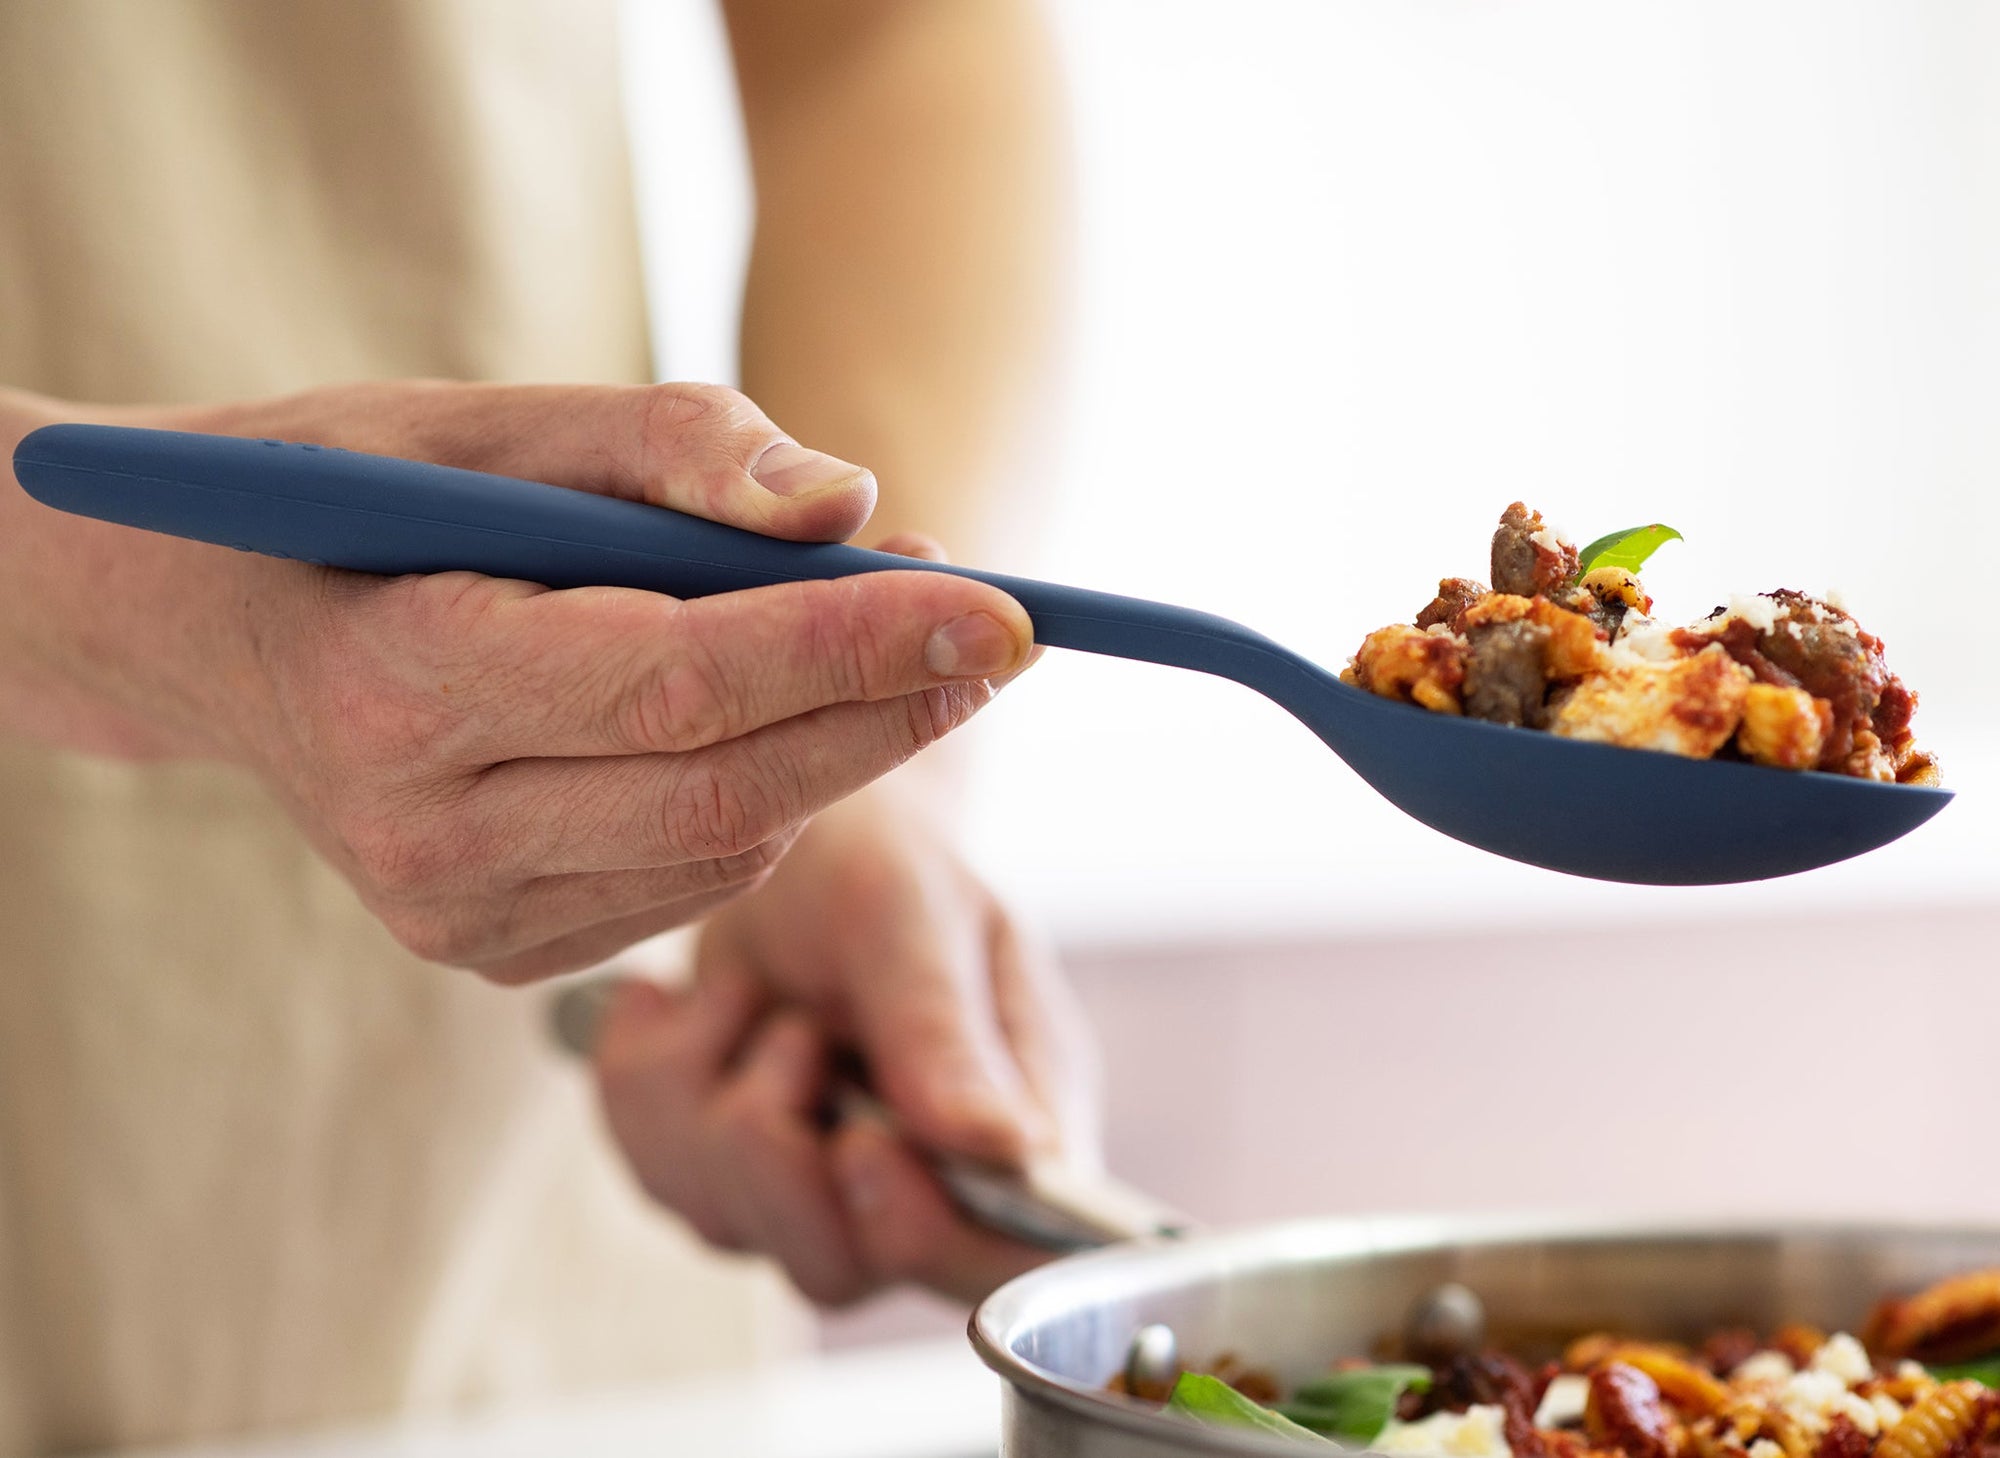 {{blue,black,gray}} A hand using a Blue Misen Mixing Spoon to lift a spoonful of pasta with sausage, basil, and red sauce from a steel pan on a stovetop.